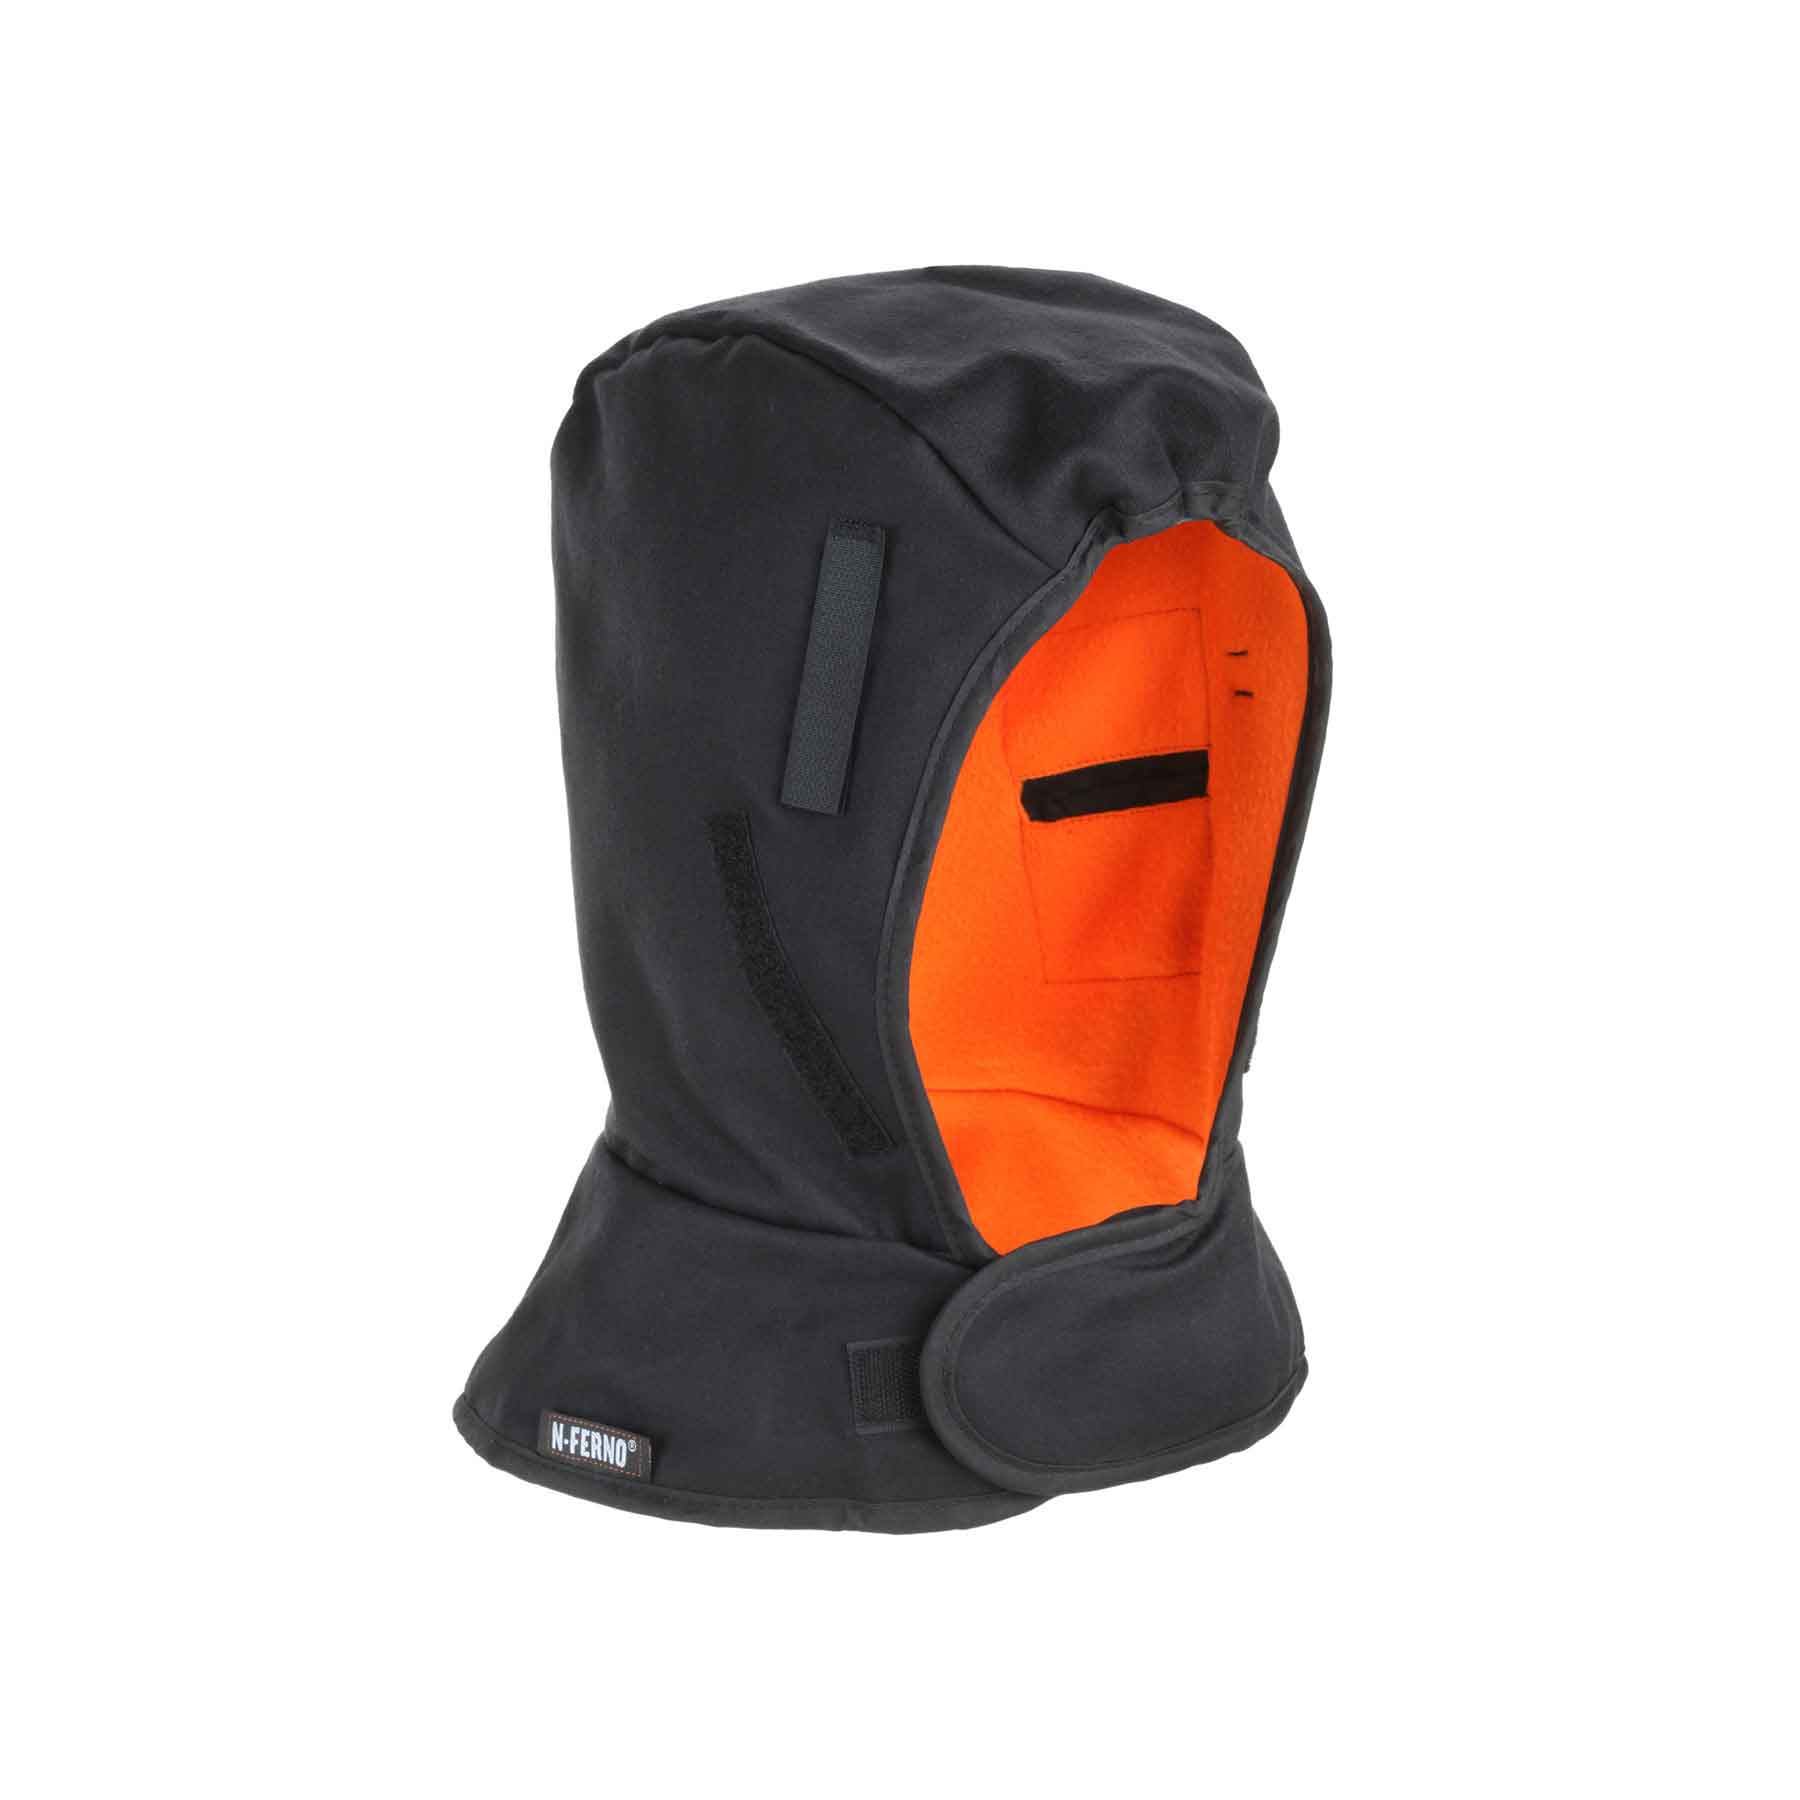 Ergodyne 6862 N-Ferno 2-Layer Winter Liner w/ Banox Shell - Shoulder from Columbia Safety